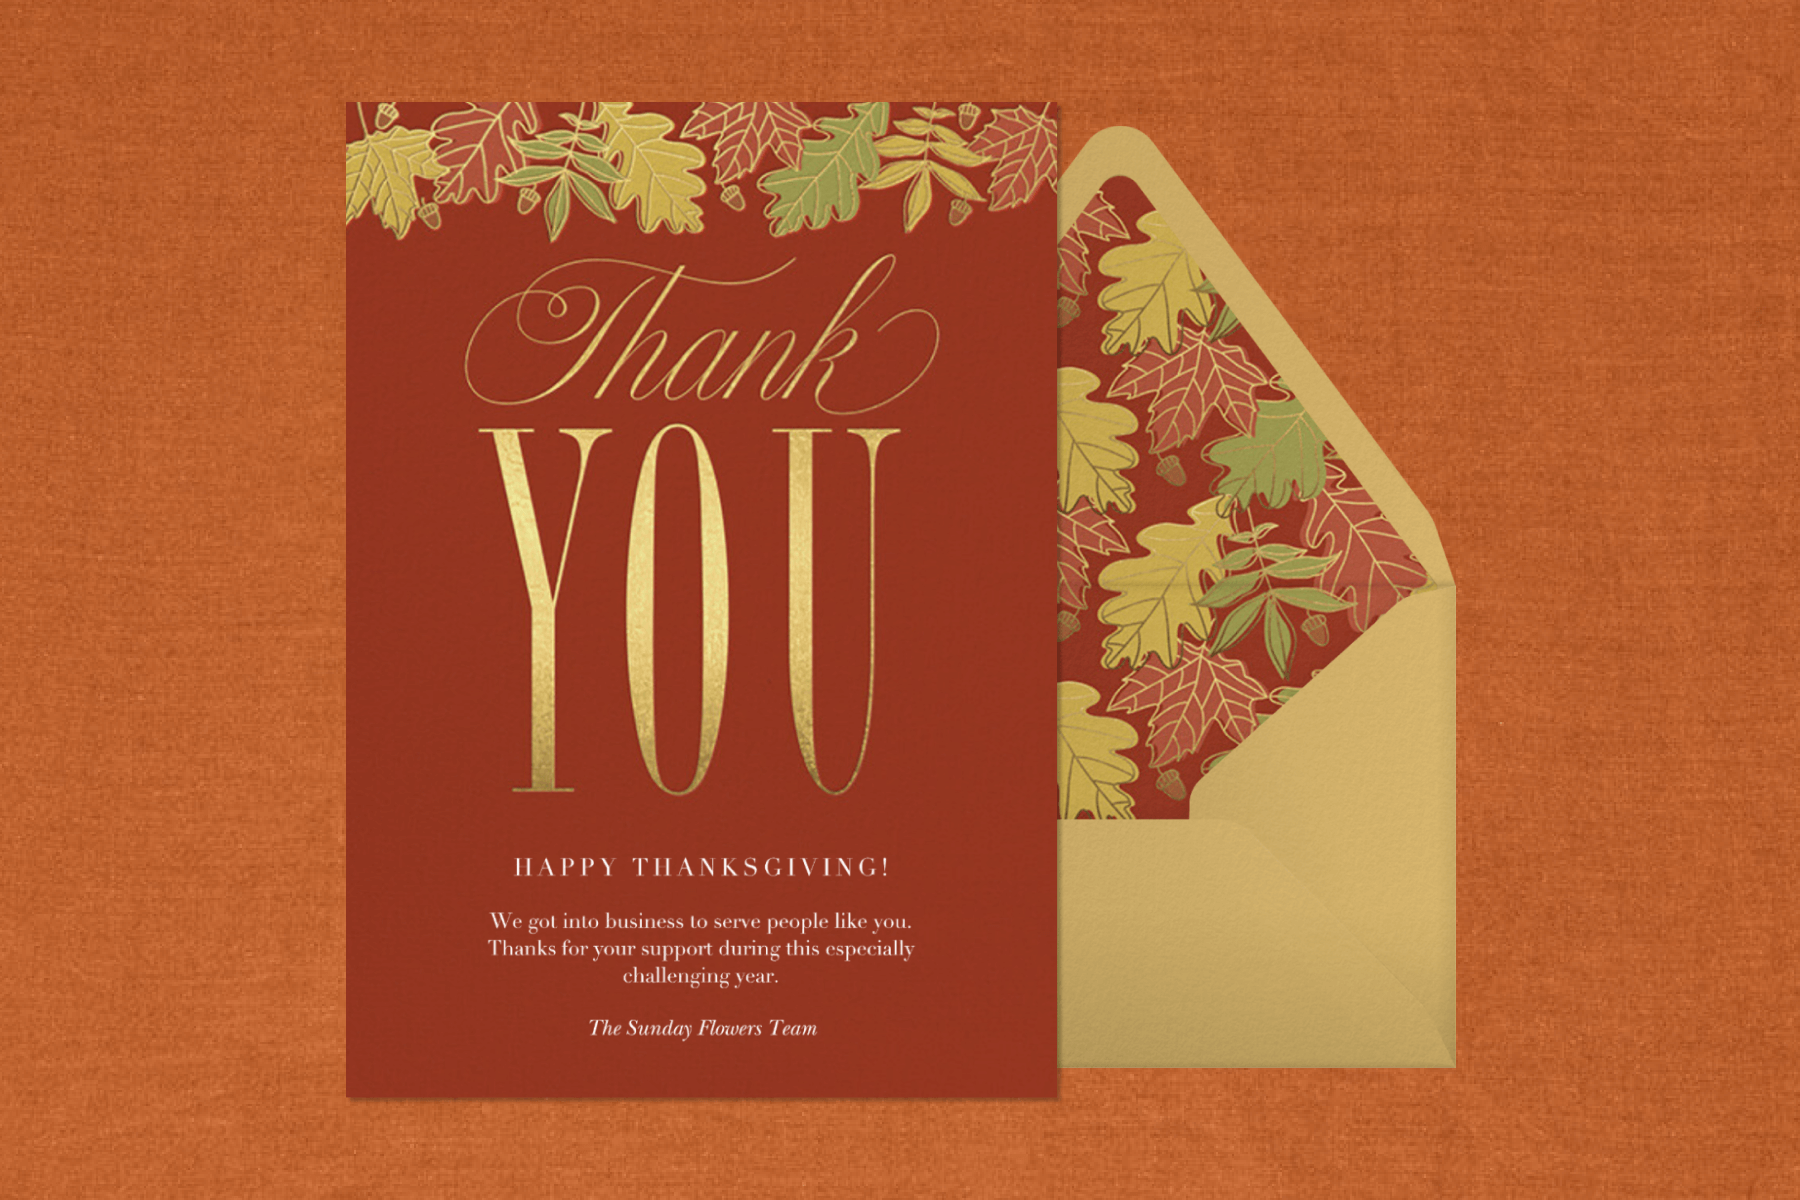 A brown thank you card with a fall foliage motif.